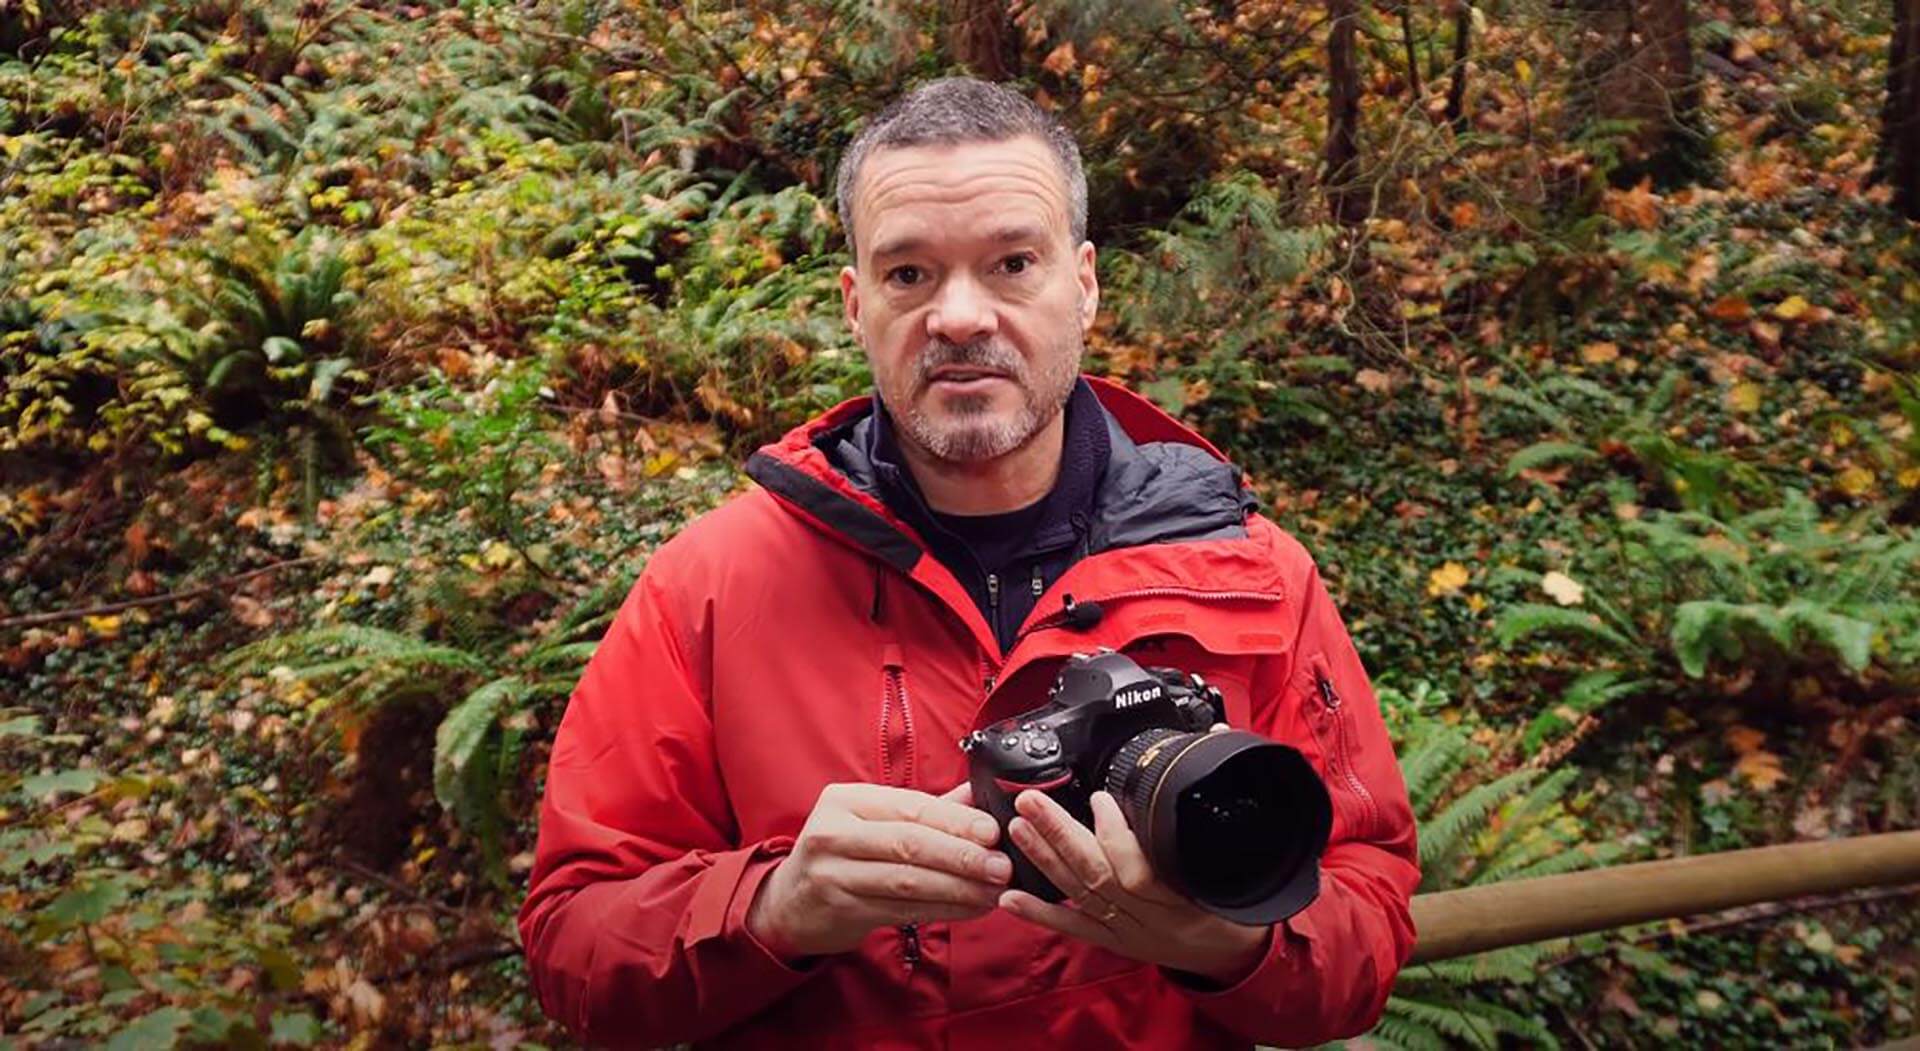 Tim and the D850, a love story